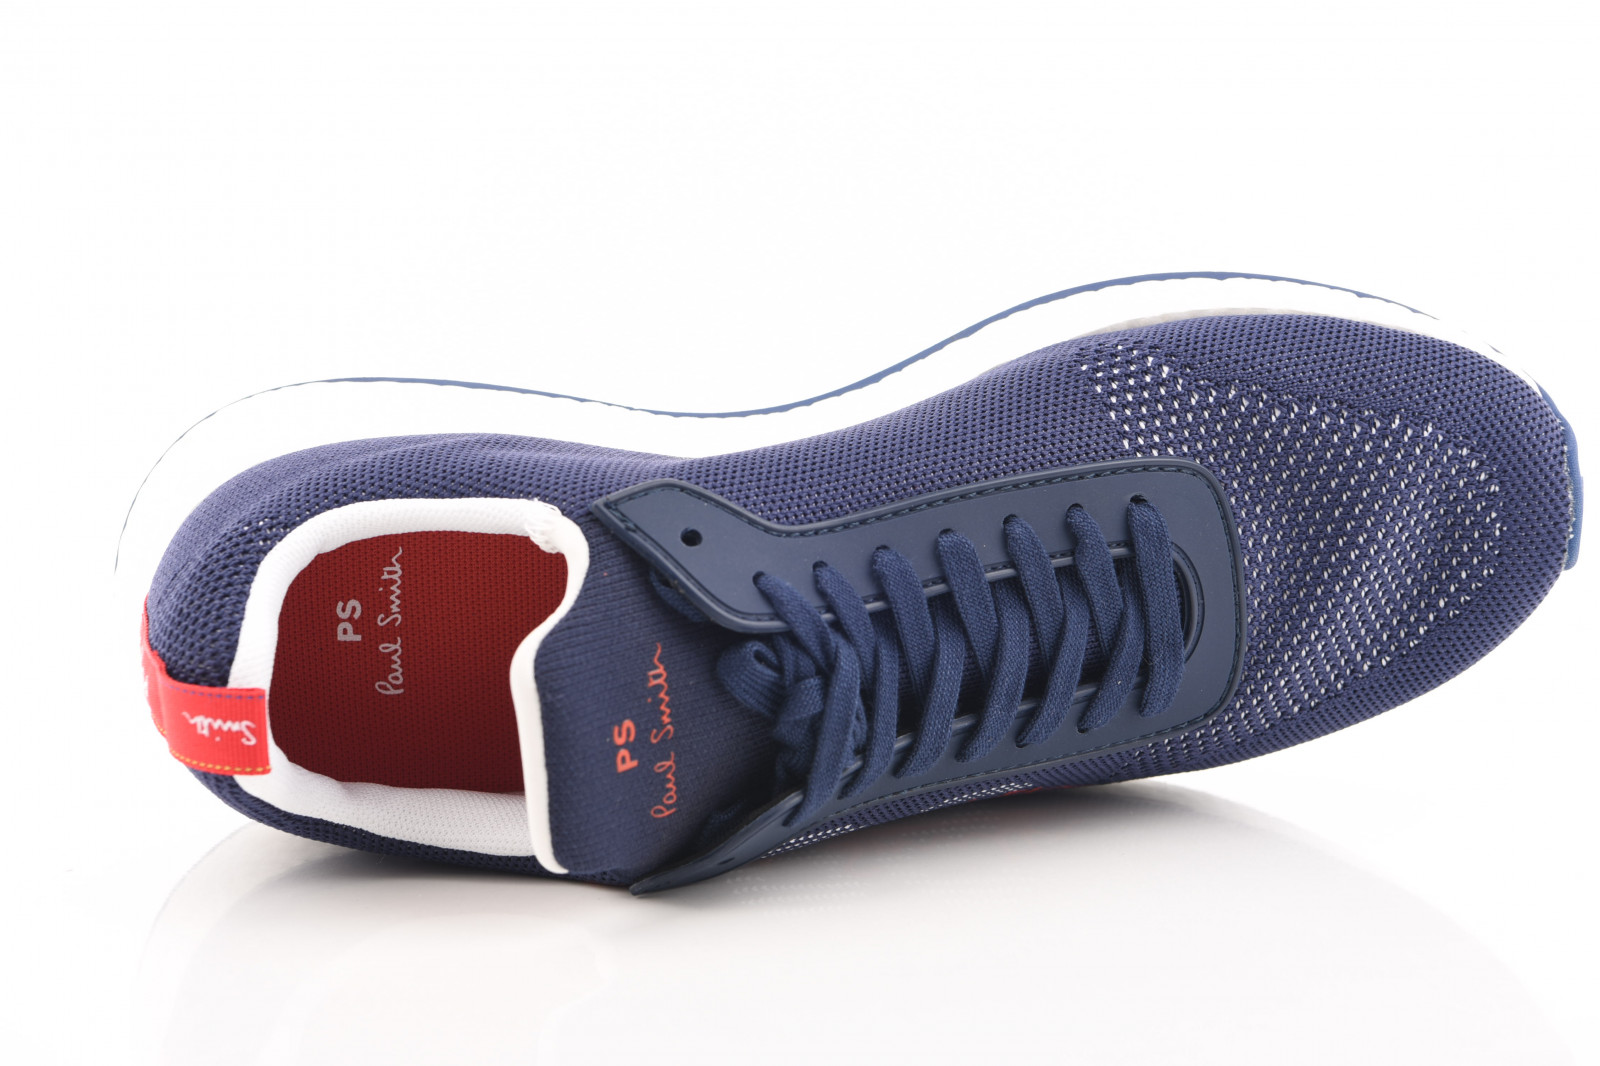 PAUL SMITH BLAUW SNEAKER | Outlet